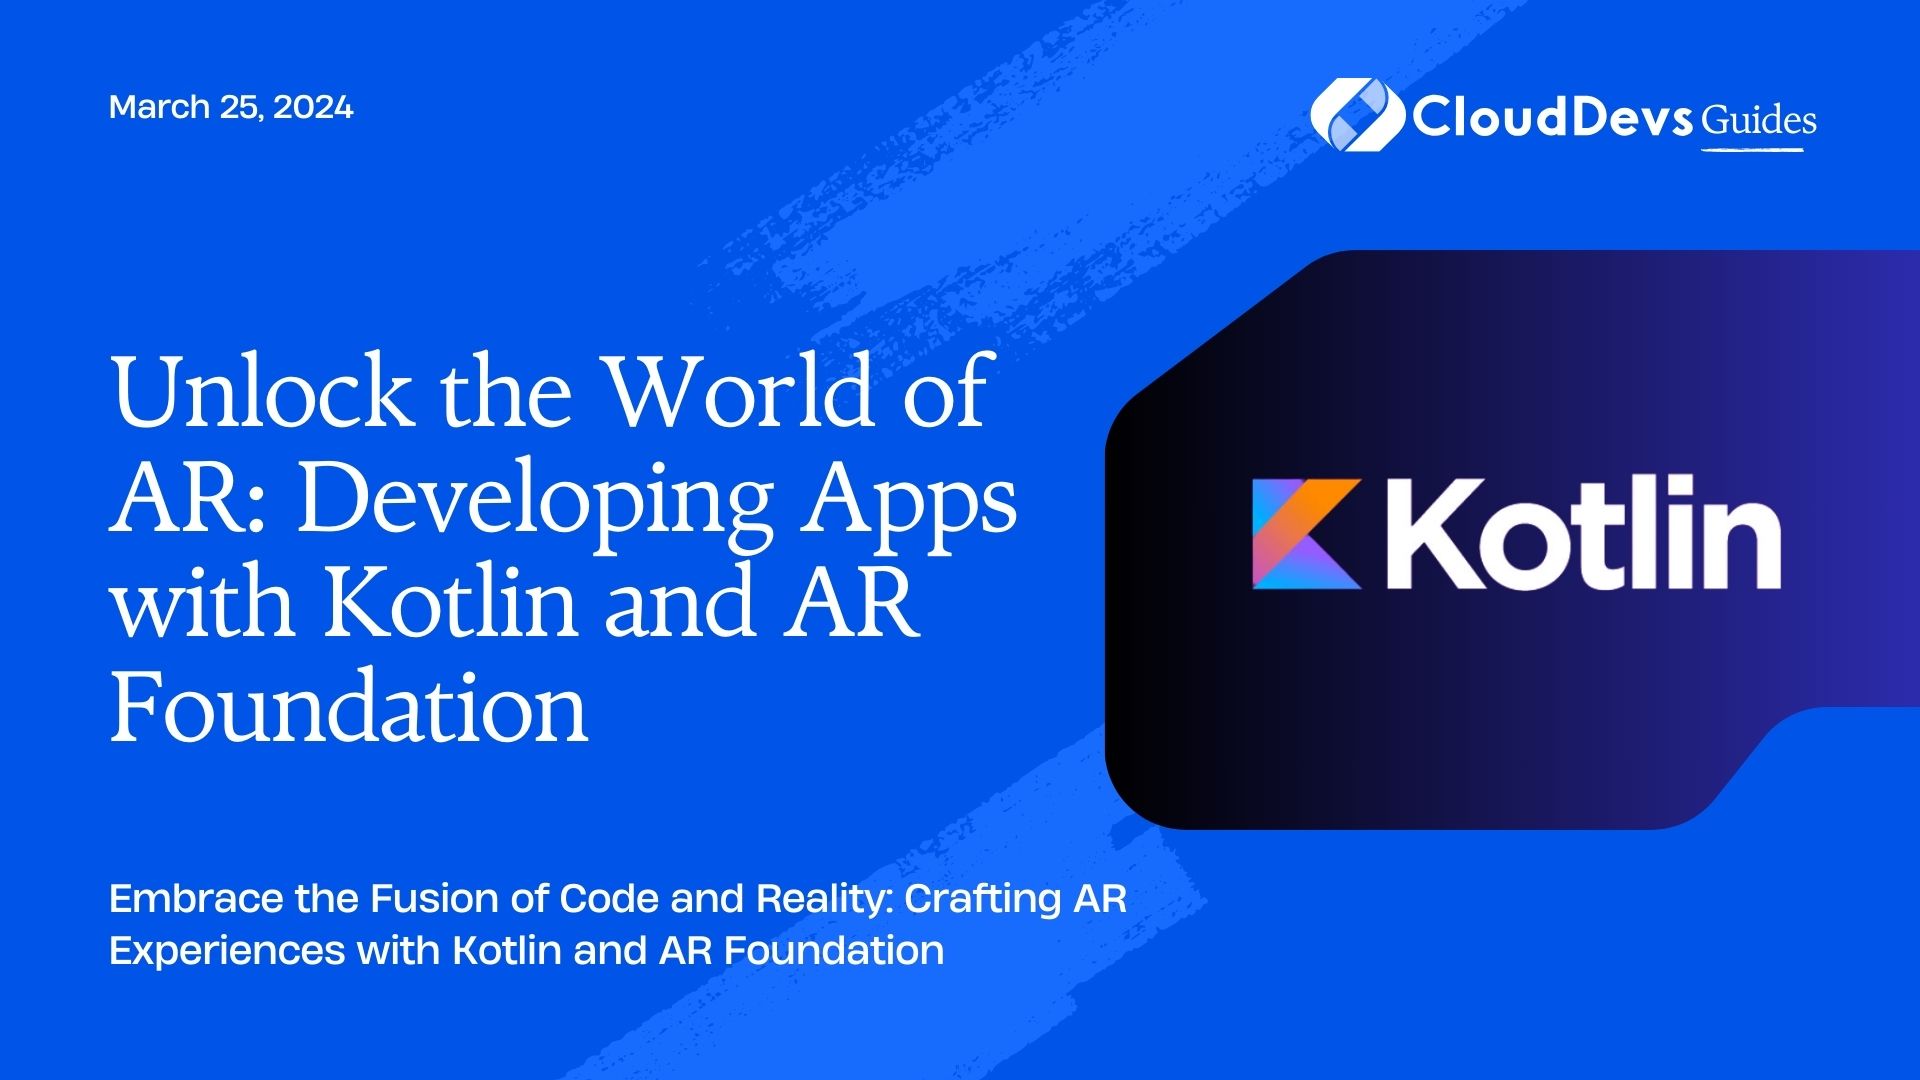 Unlock the World of AR: Developing Apps with Kotlin and AR Foundation